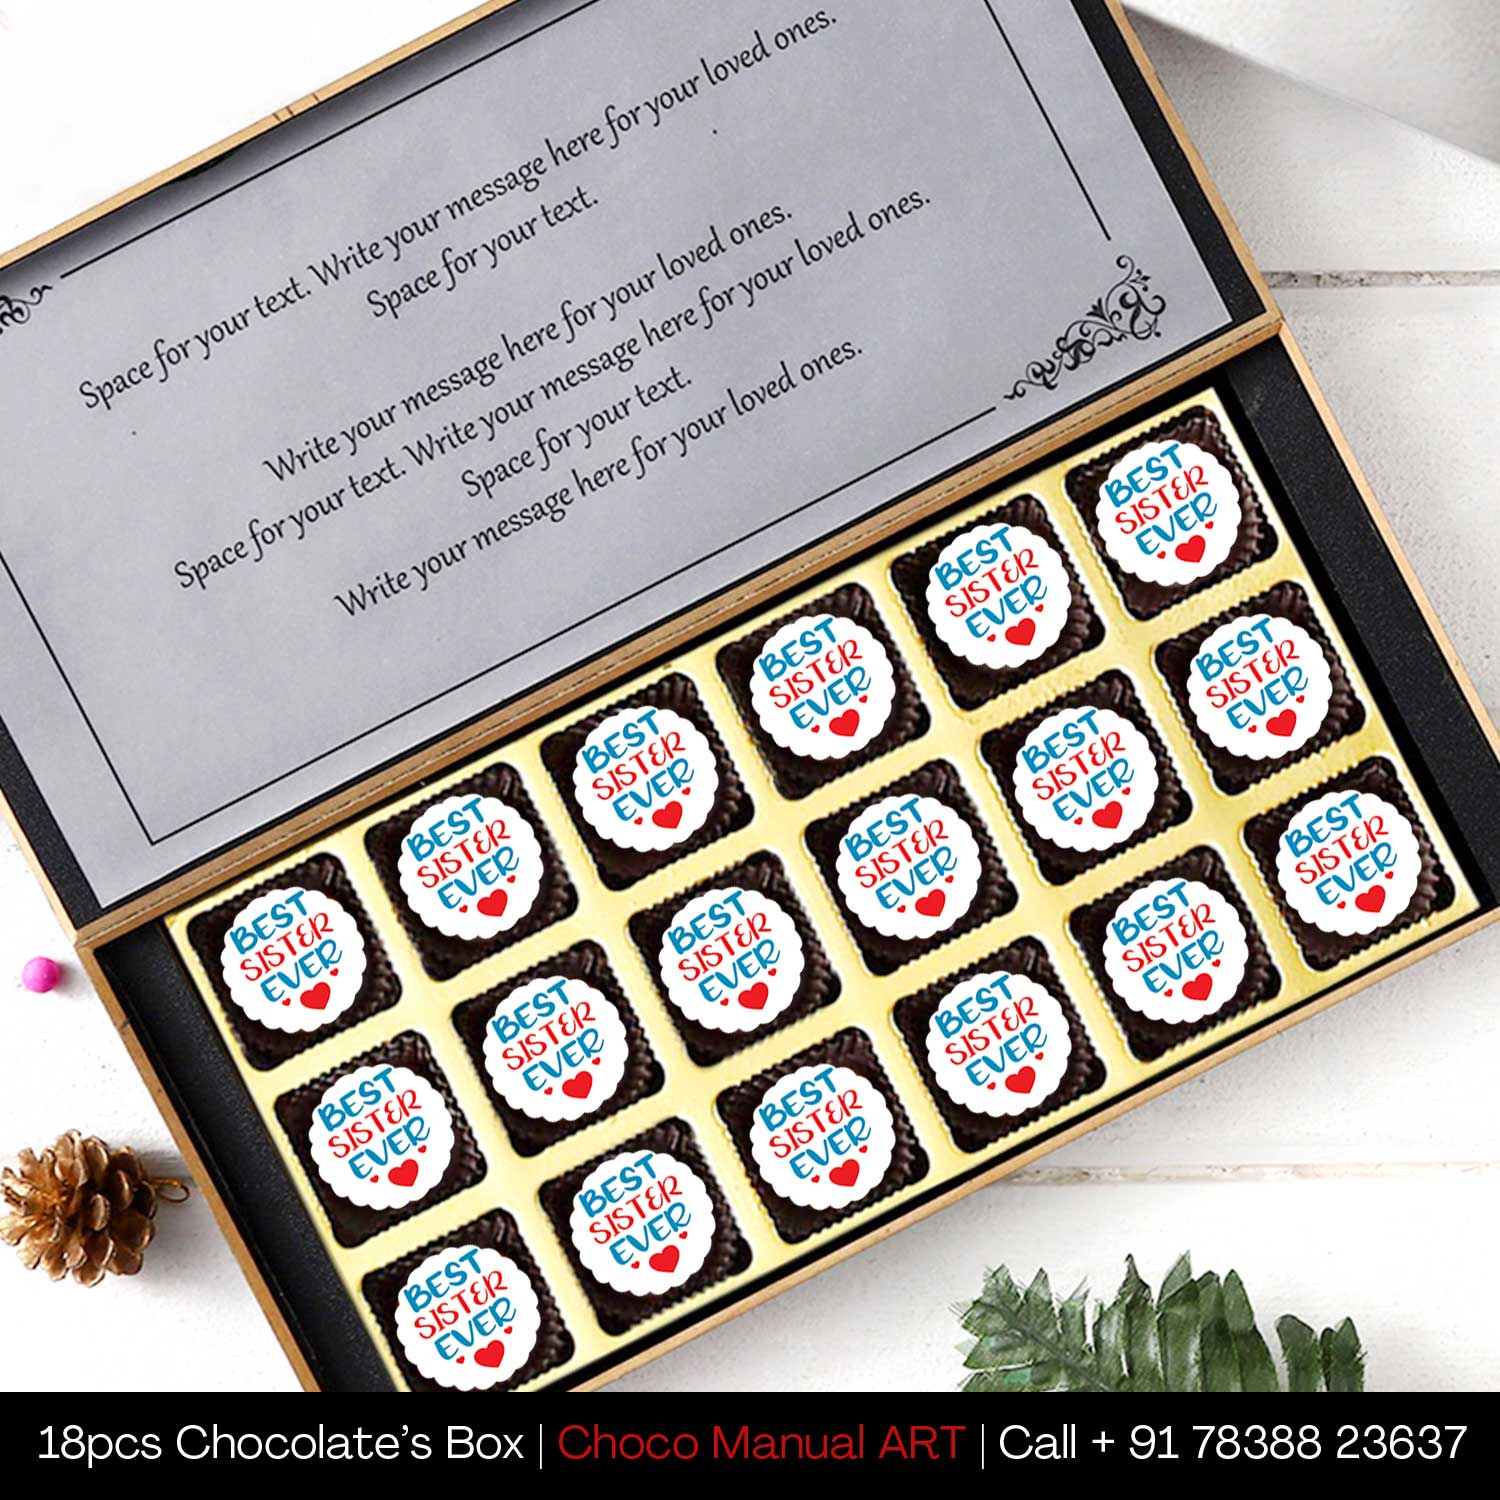  unique gifts for sister matching sister gifts useful gift for sister personalised chocolates with names personalized gifts for sister chocolate gift for sister photo printed on chocolate best gift for sister